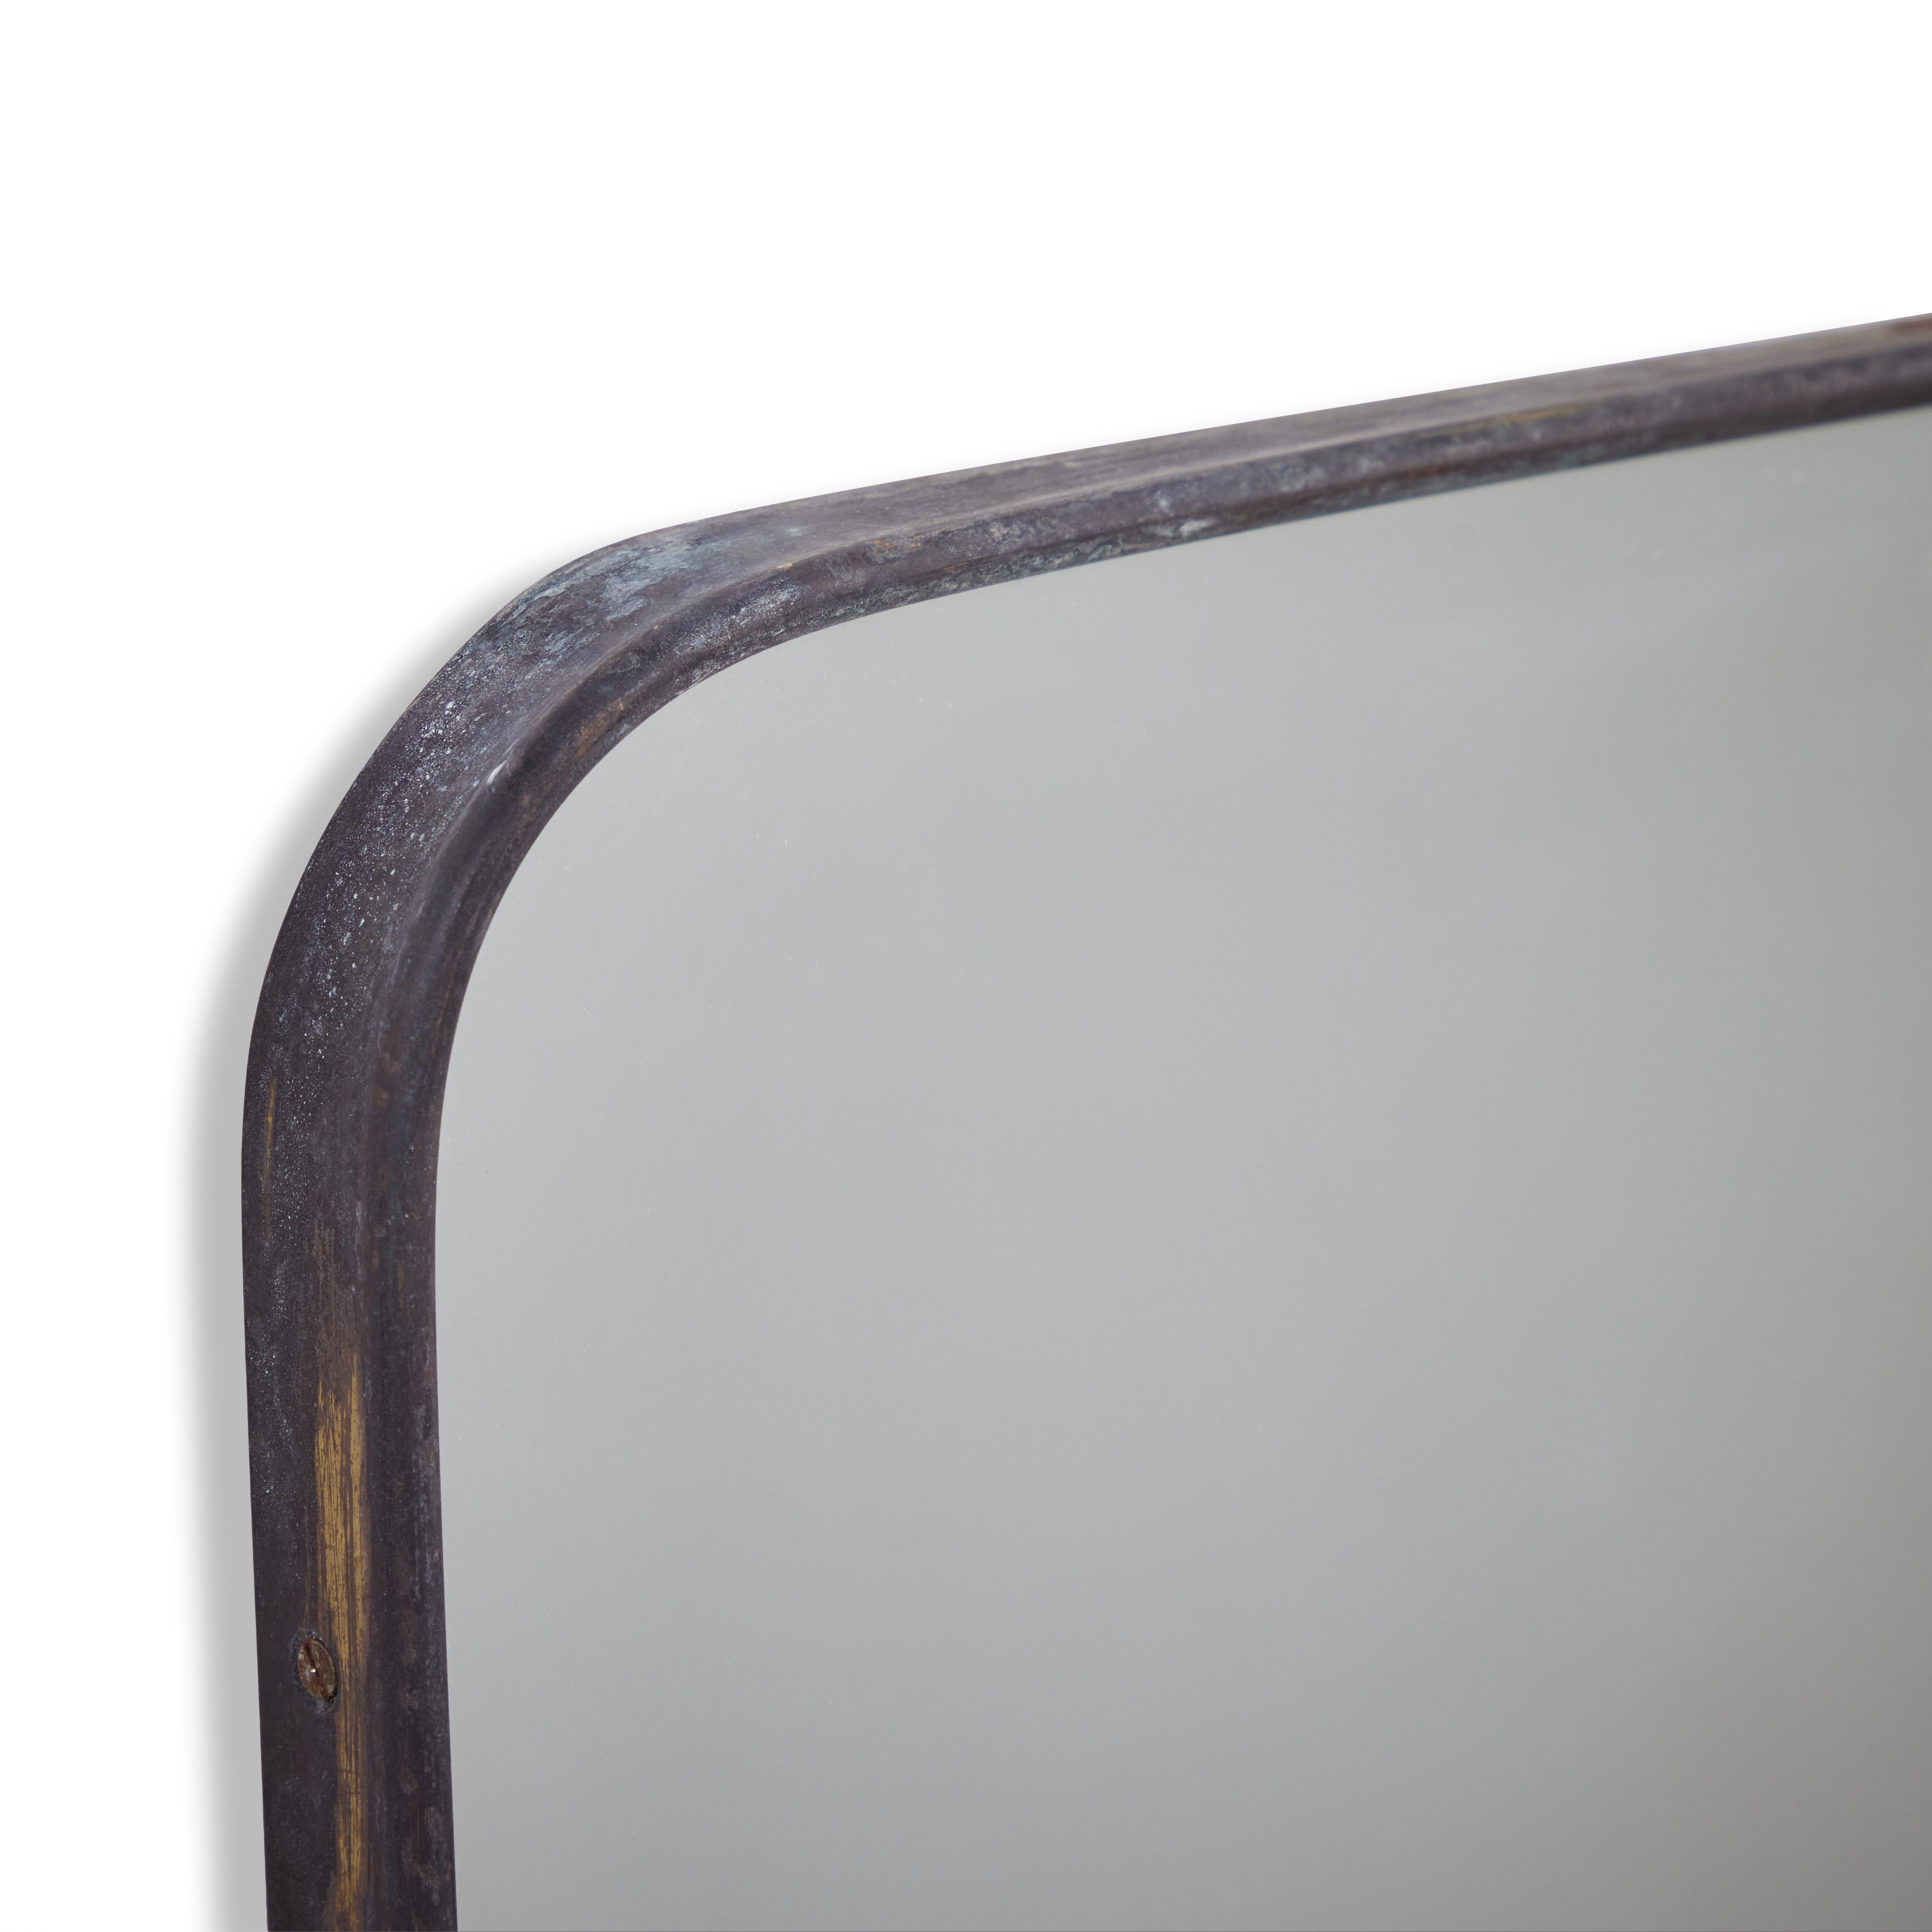 Italian patinated brass framed wall mirrors with a quantity of five available. Made in Italy circa 1960s.